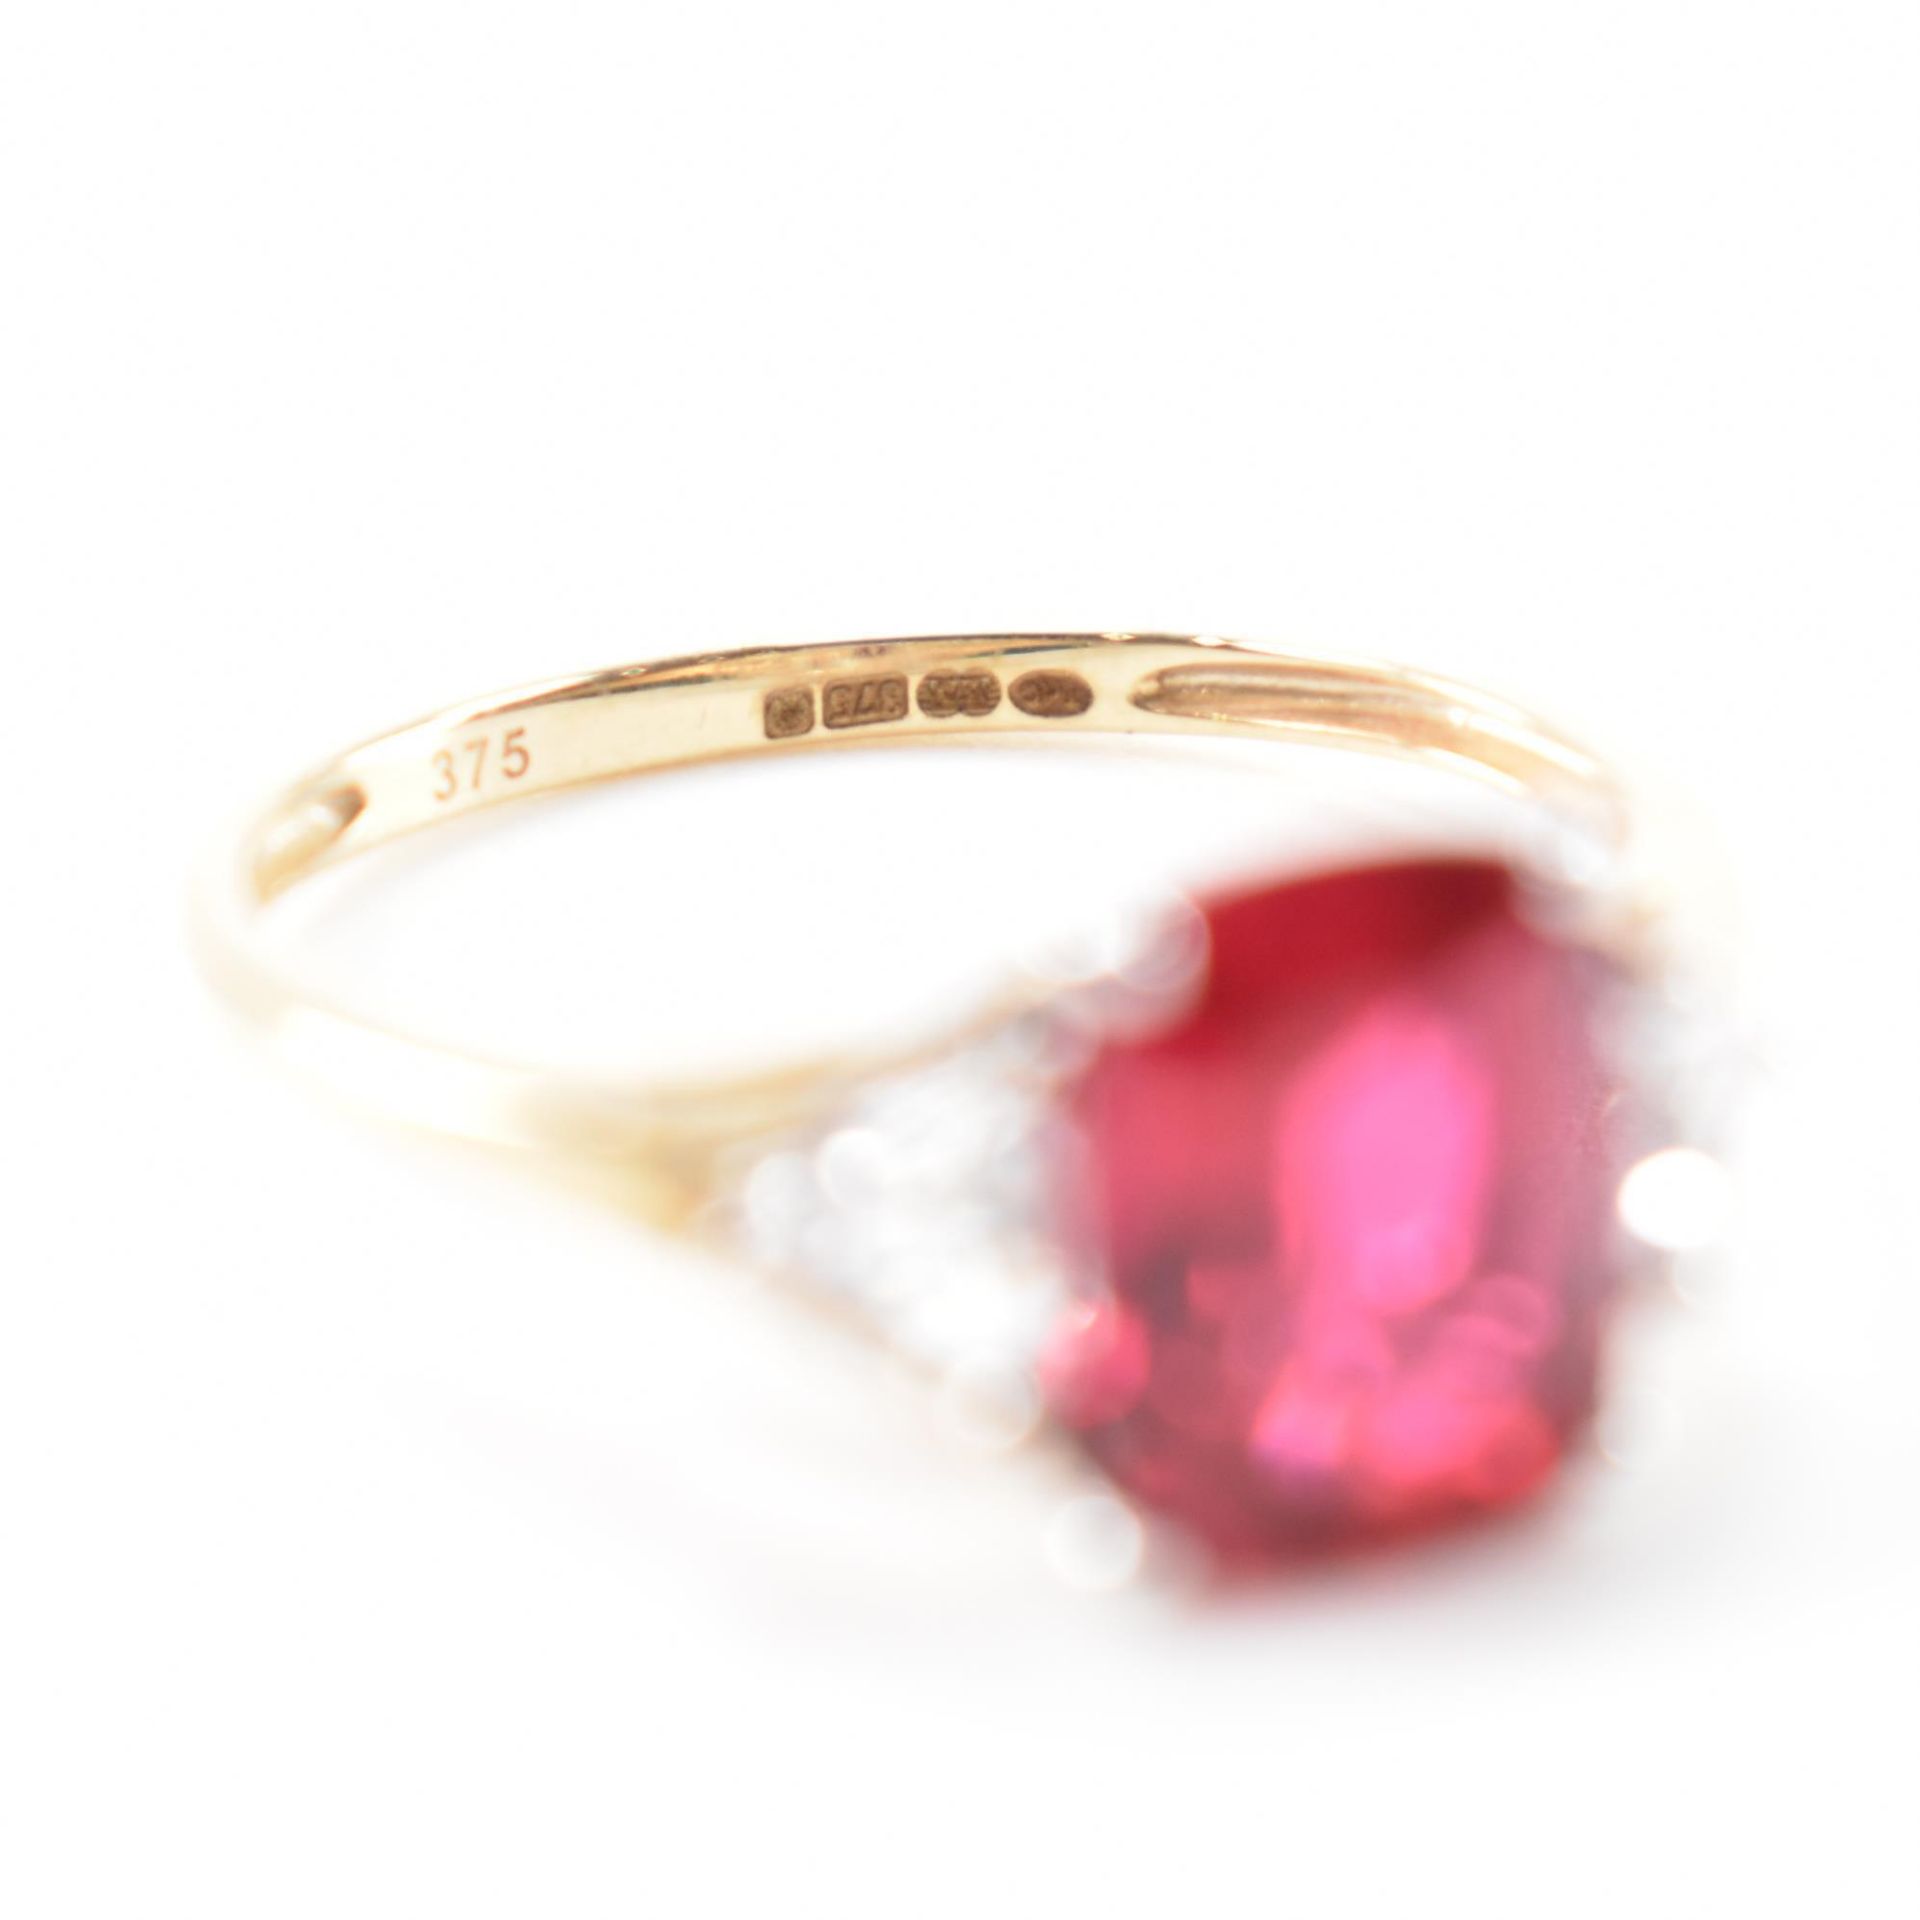 HALLMARKED 9CT GOLD & SYNTHETIC RUBY RING - Image 7 of 8